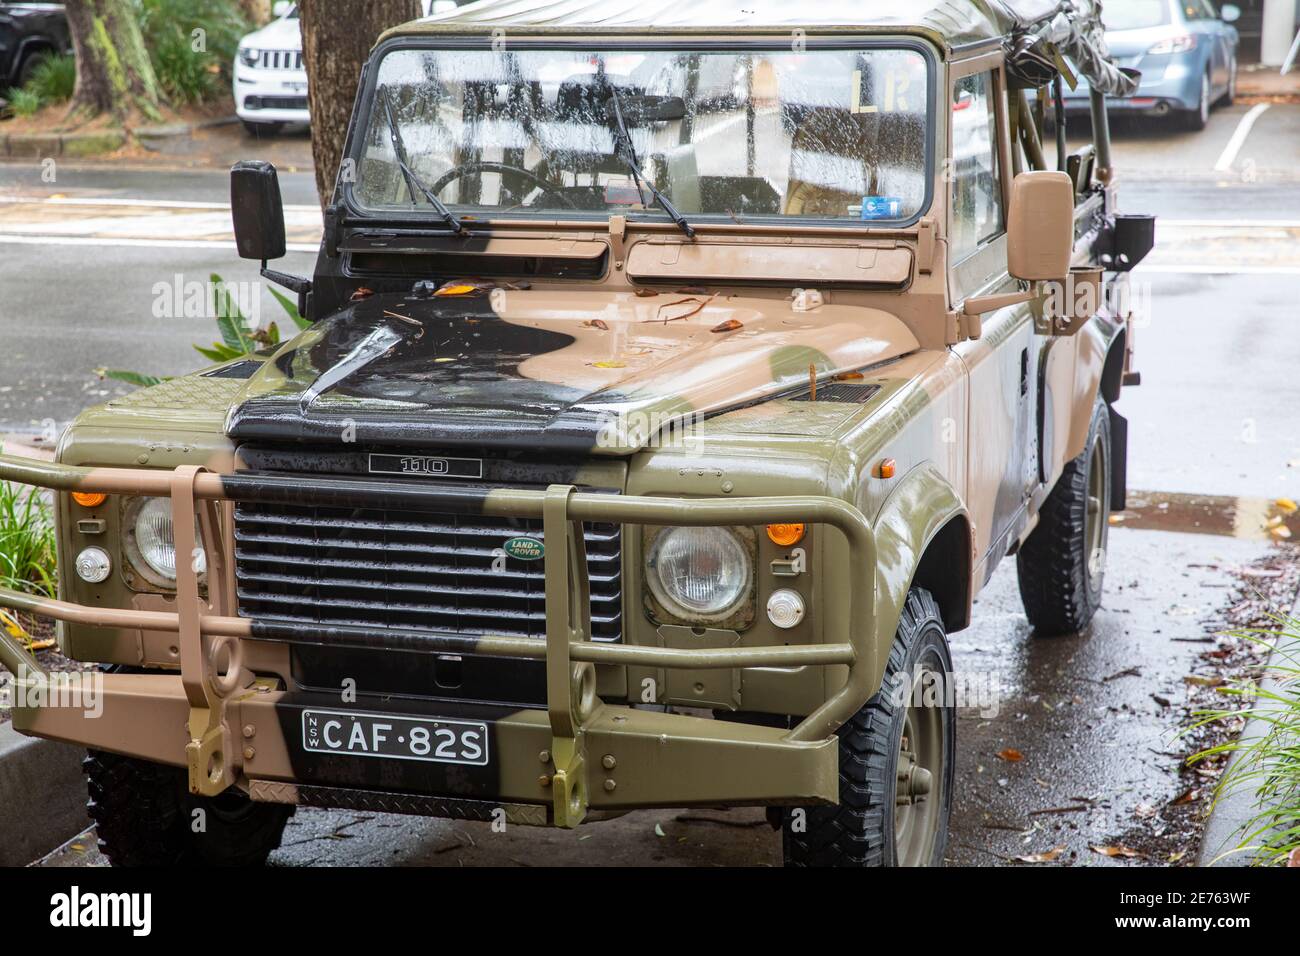 Classic Land Rover Defender 110 in army camouflage colours parked in Sydney,NSW,Australia Stock Photo